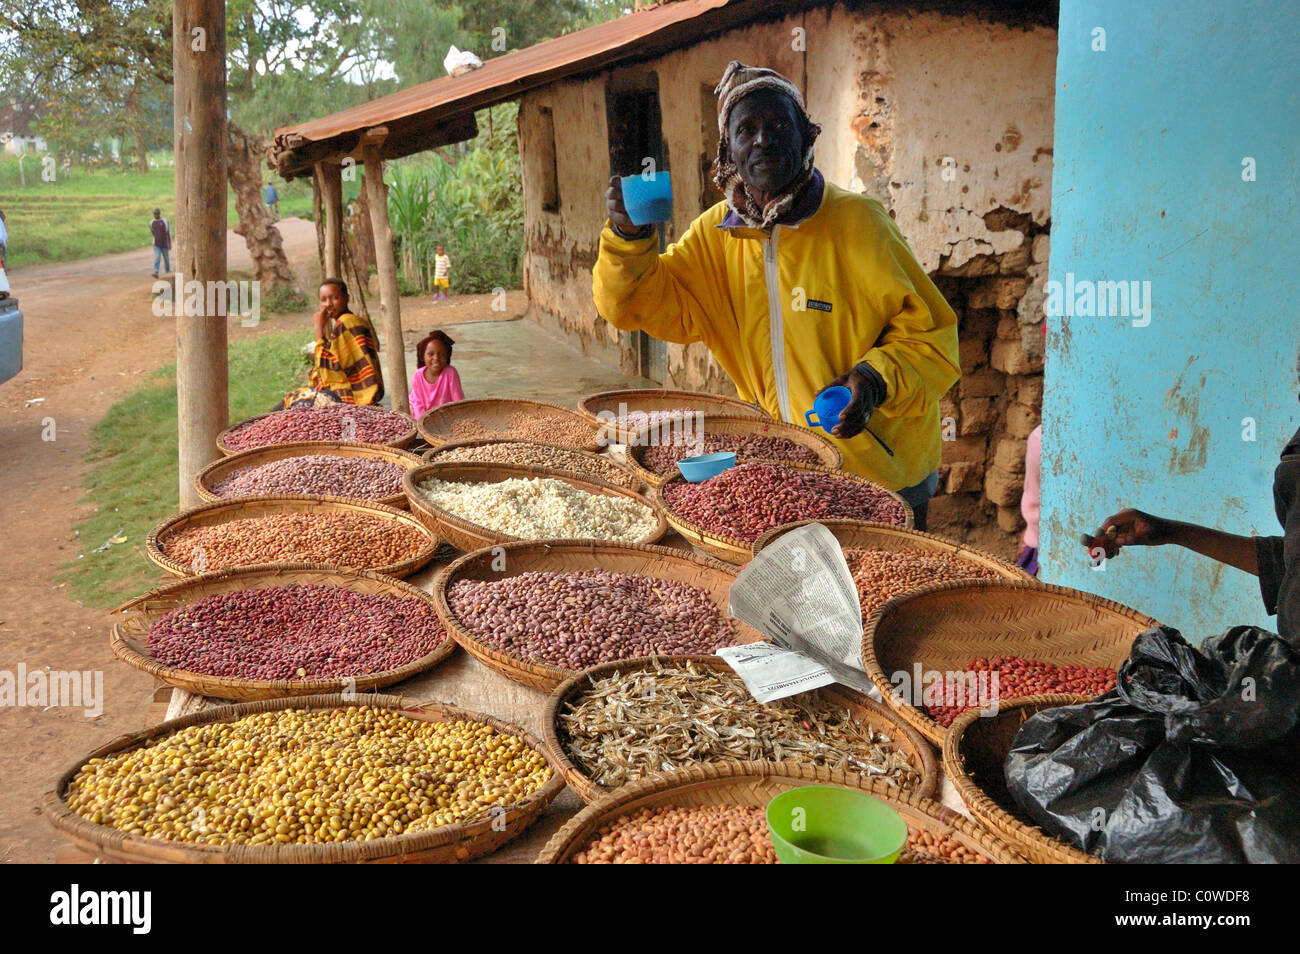 A man selling beans and grains in the town of Usa River near Arusha Tanzania Stock Photo